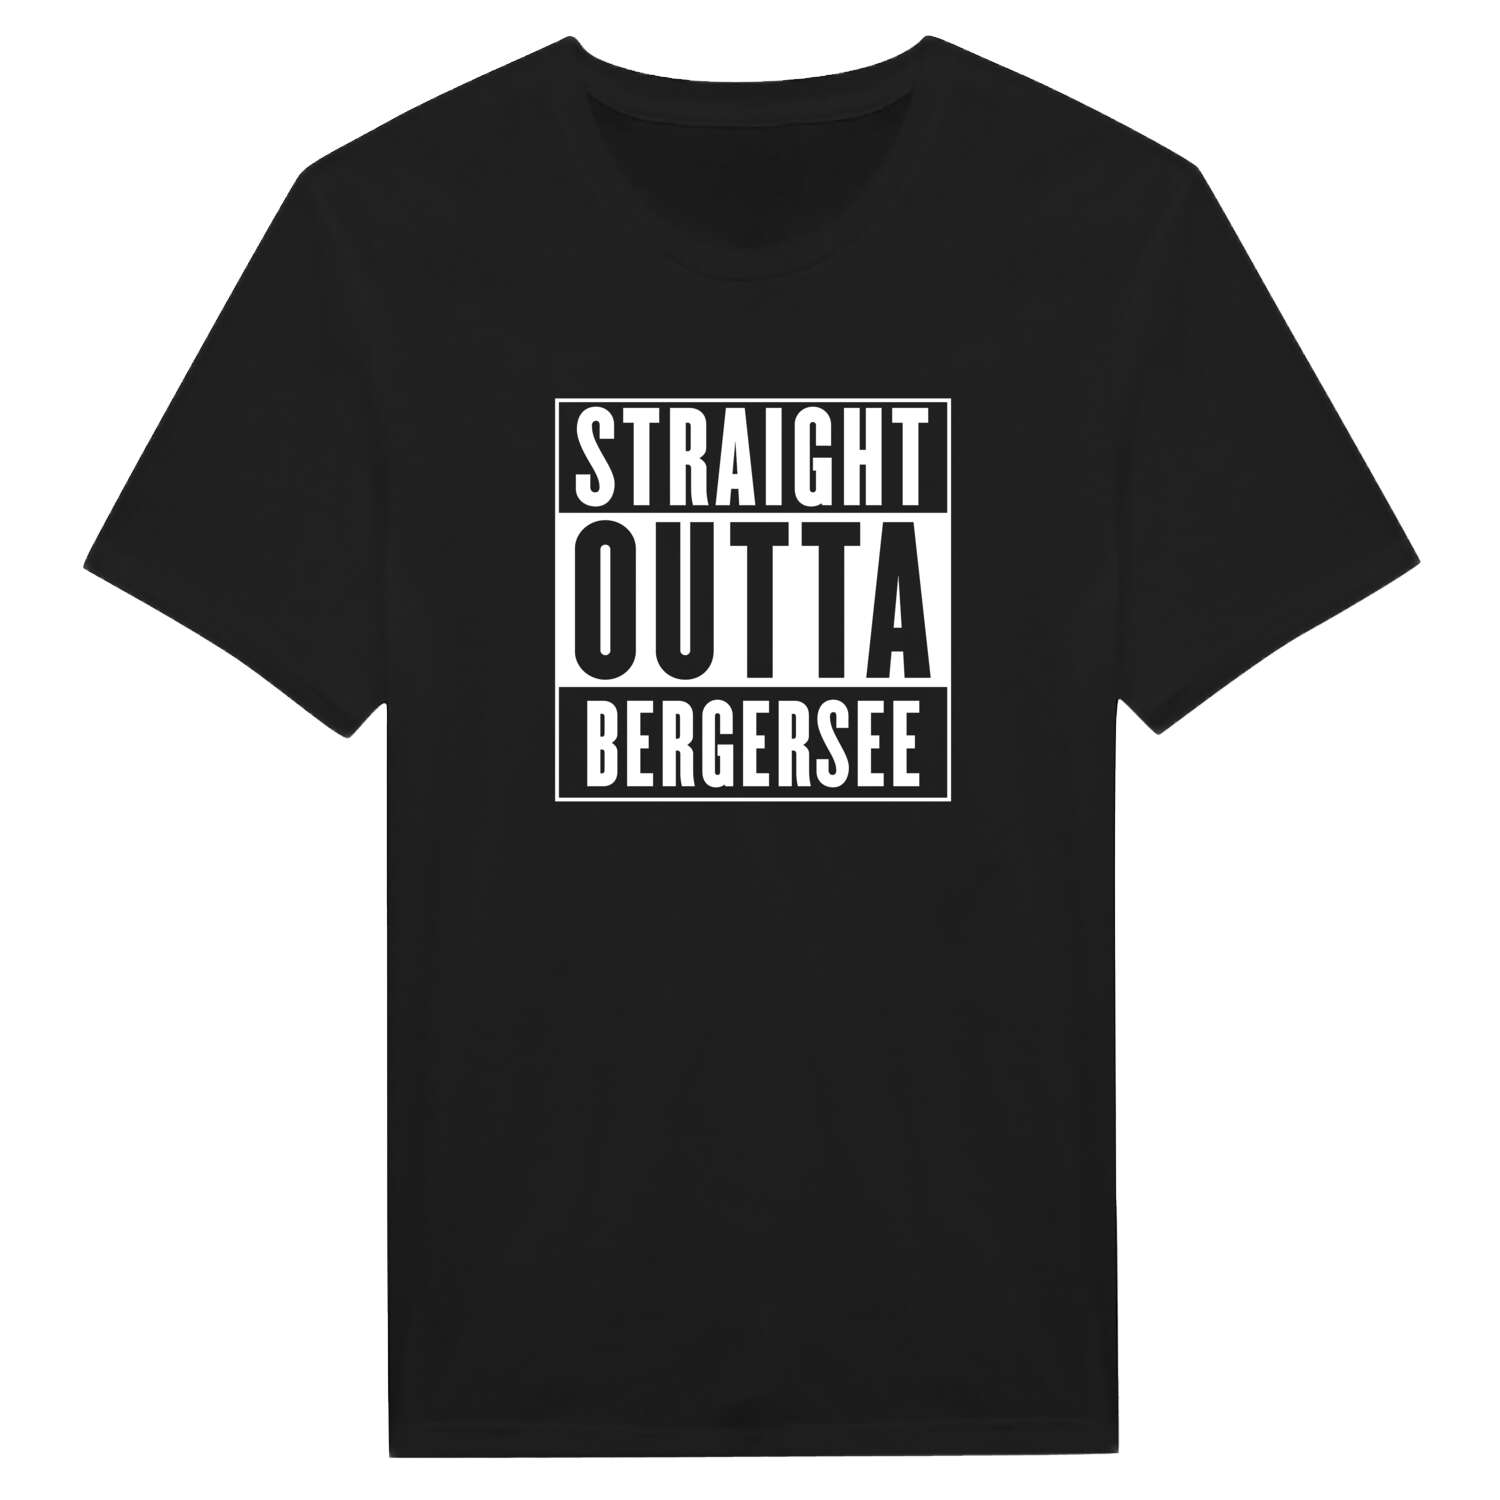 Bergersee T-Shirt »Straight Outta«